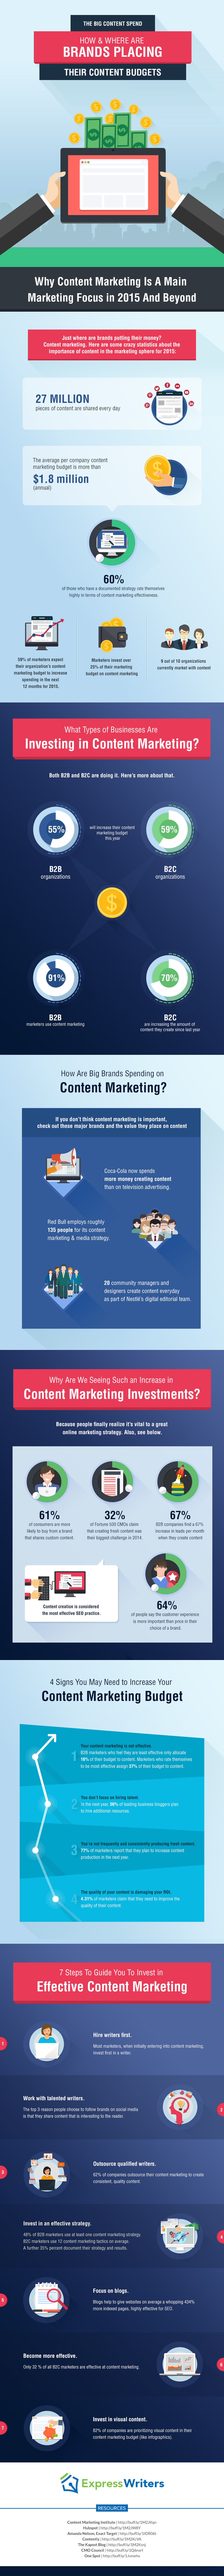 content marketing spending budget infographic